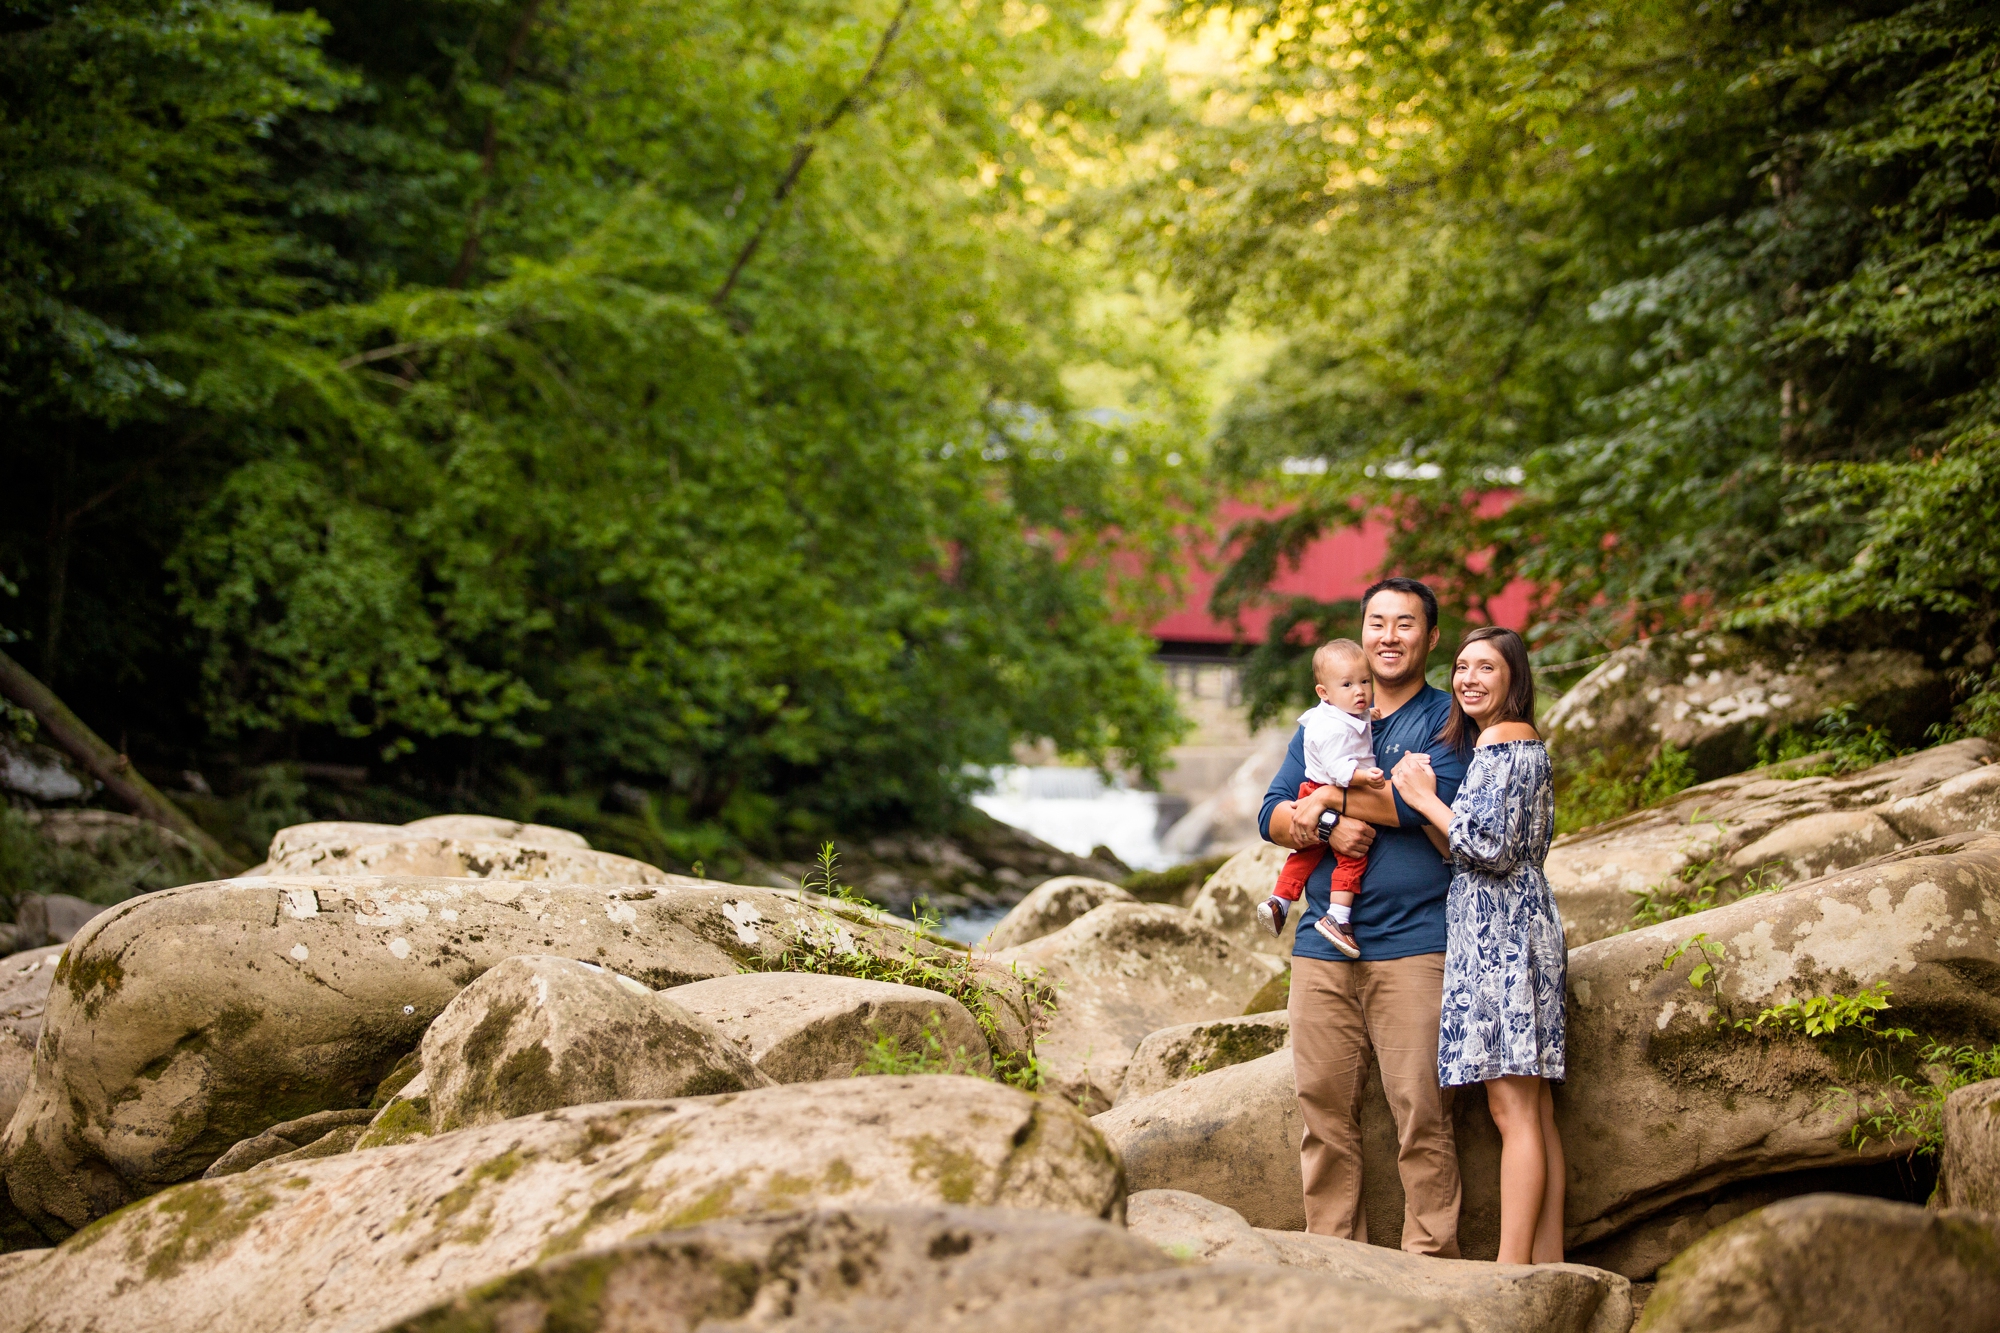 best places to take pictures in pittsburgh, cool places to take pictures in pittsburgh, mcconnells mill state park, pittsburgh family photographer, cranberry township family photographer